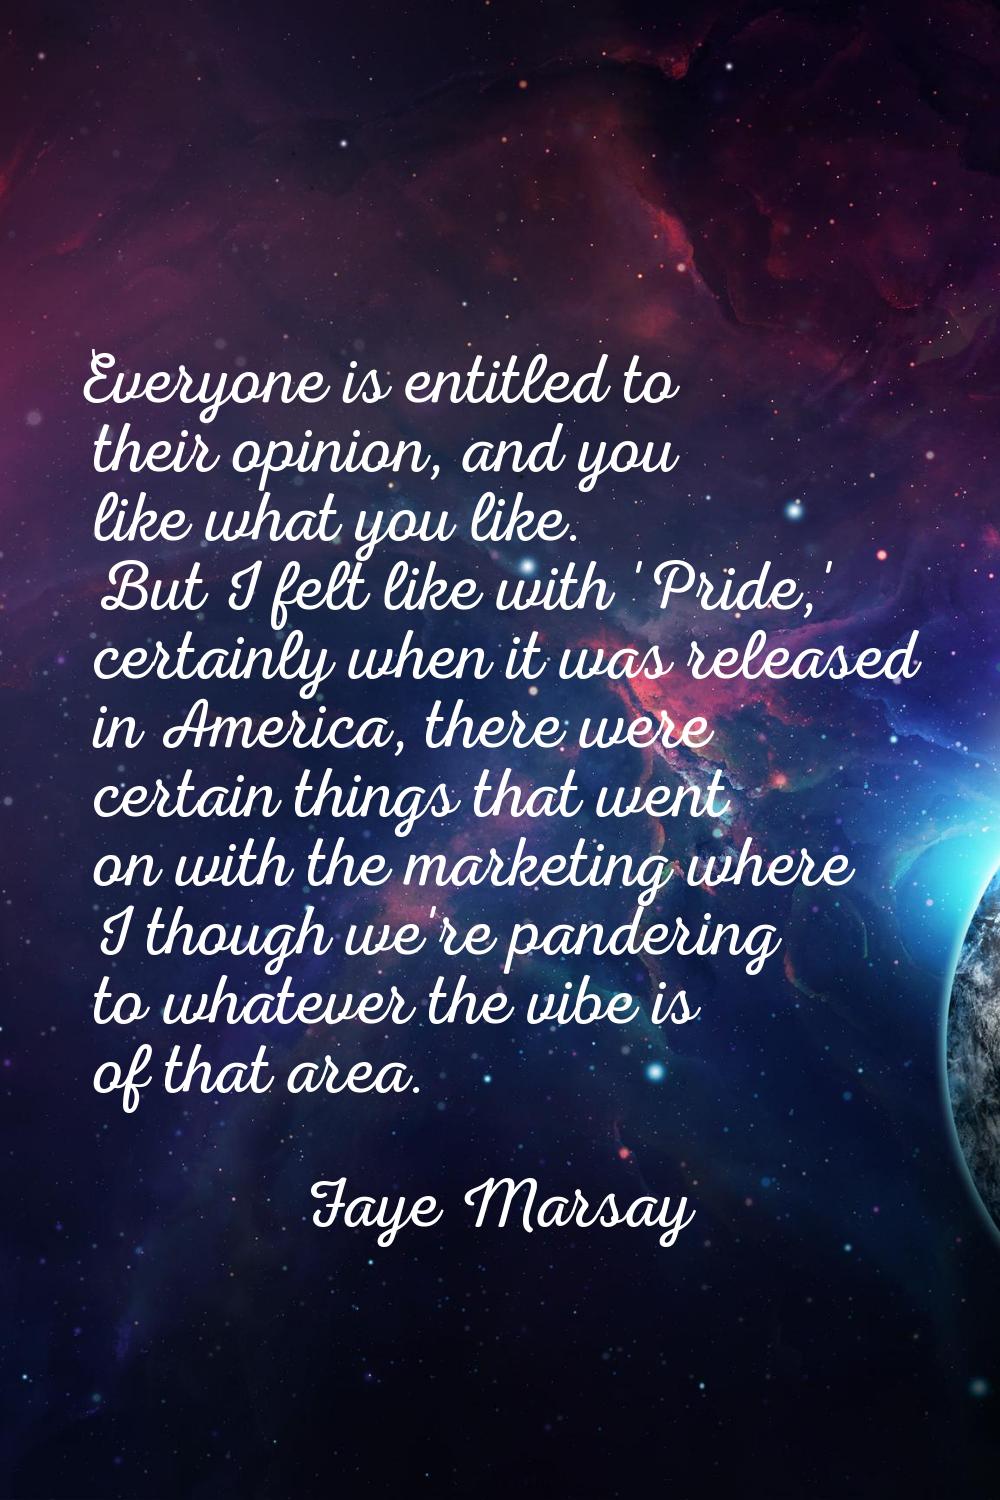 Everyone is entitled to their opinion, and you like what you like. But I felt like with 'Pride,' ce